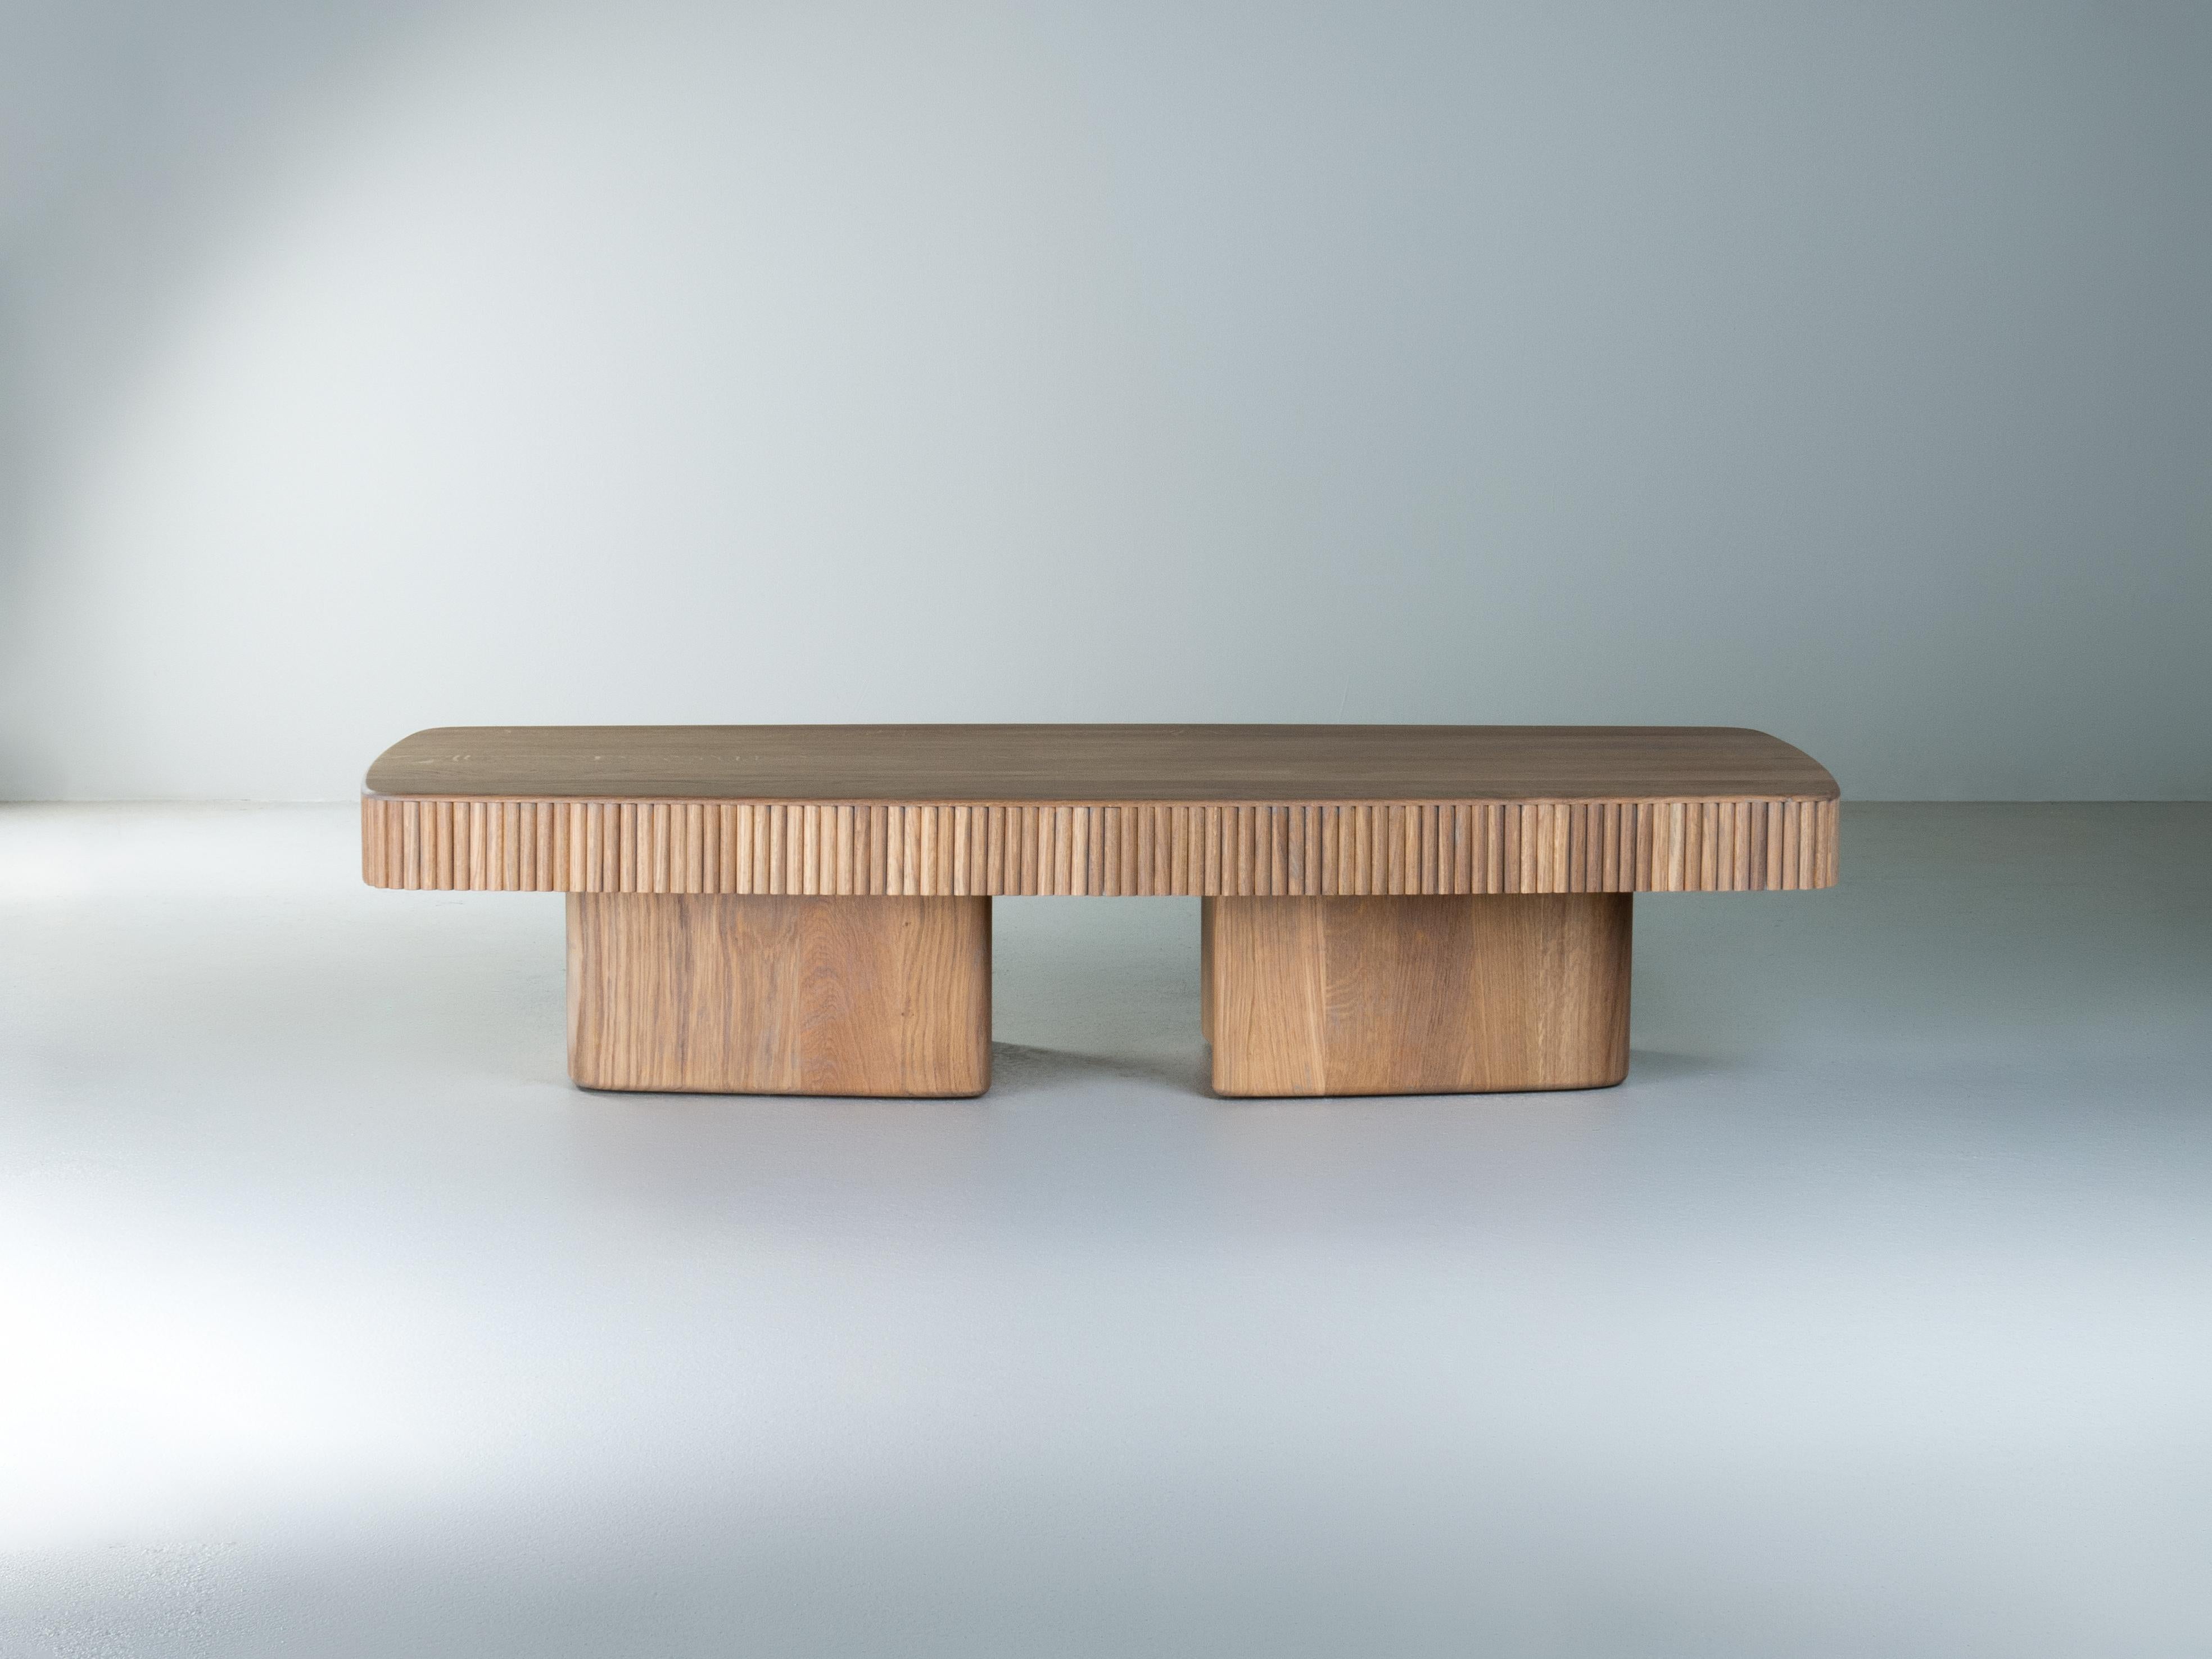 This table differs from the other coffee tables from our portfolio primarily due to its compact volume and slightly lower height (30 cm) than standard coffee tables. This provides it with a complementary sense of fullness and monolithicity.  The